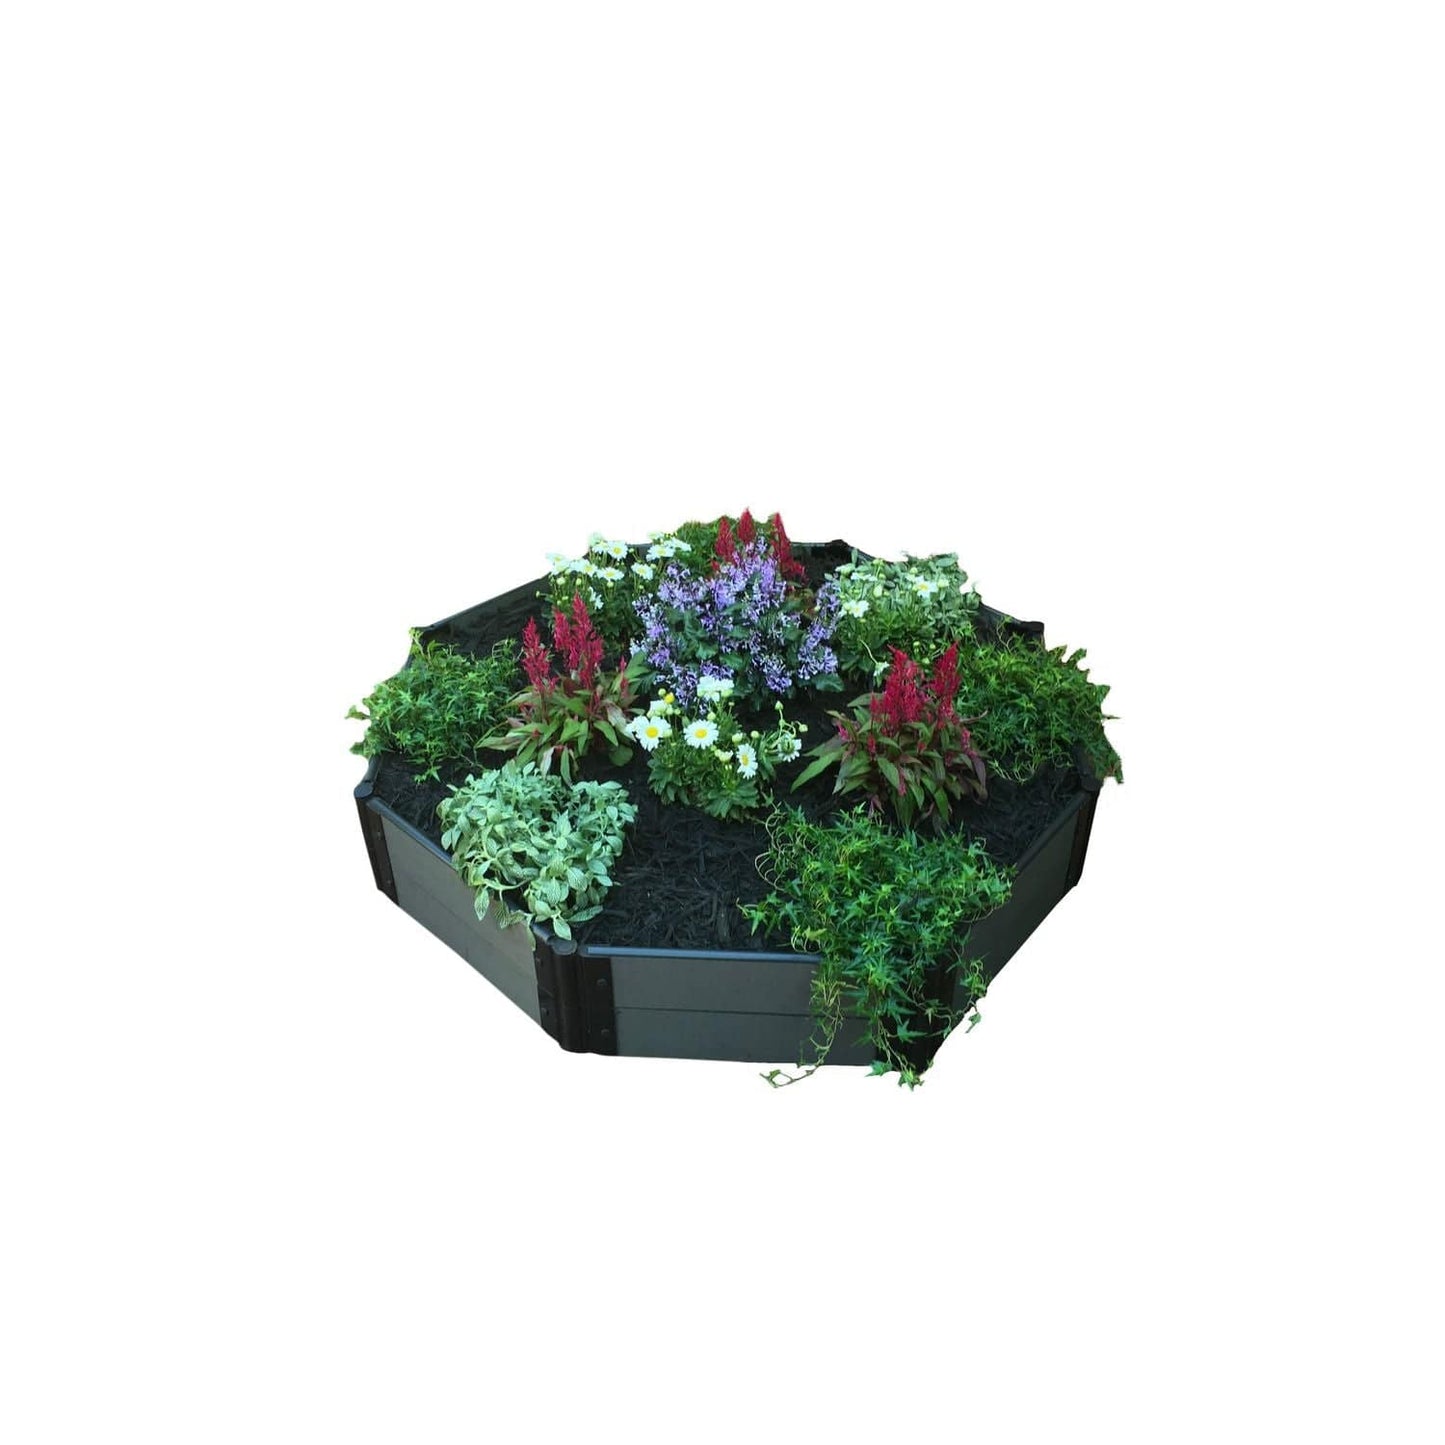 Frame It All Gardening Accessories Frame It All | Tool-Free St. John Baptistry Raised Garden Bed (Octagon) 5' X 5' X 11" - Classic Sienna - 2" Profile 200002462